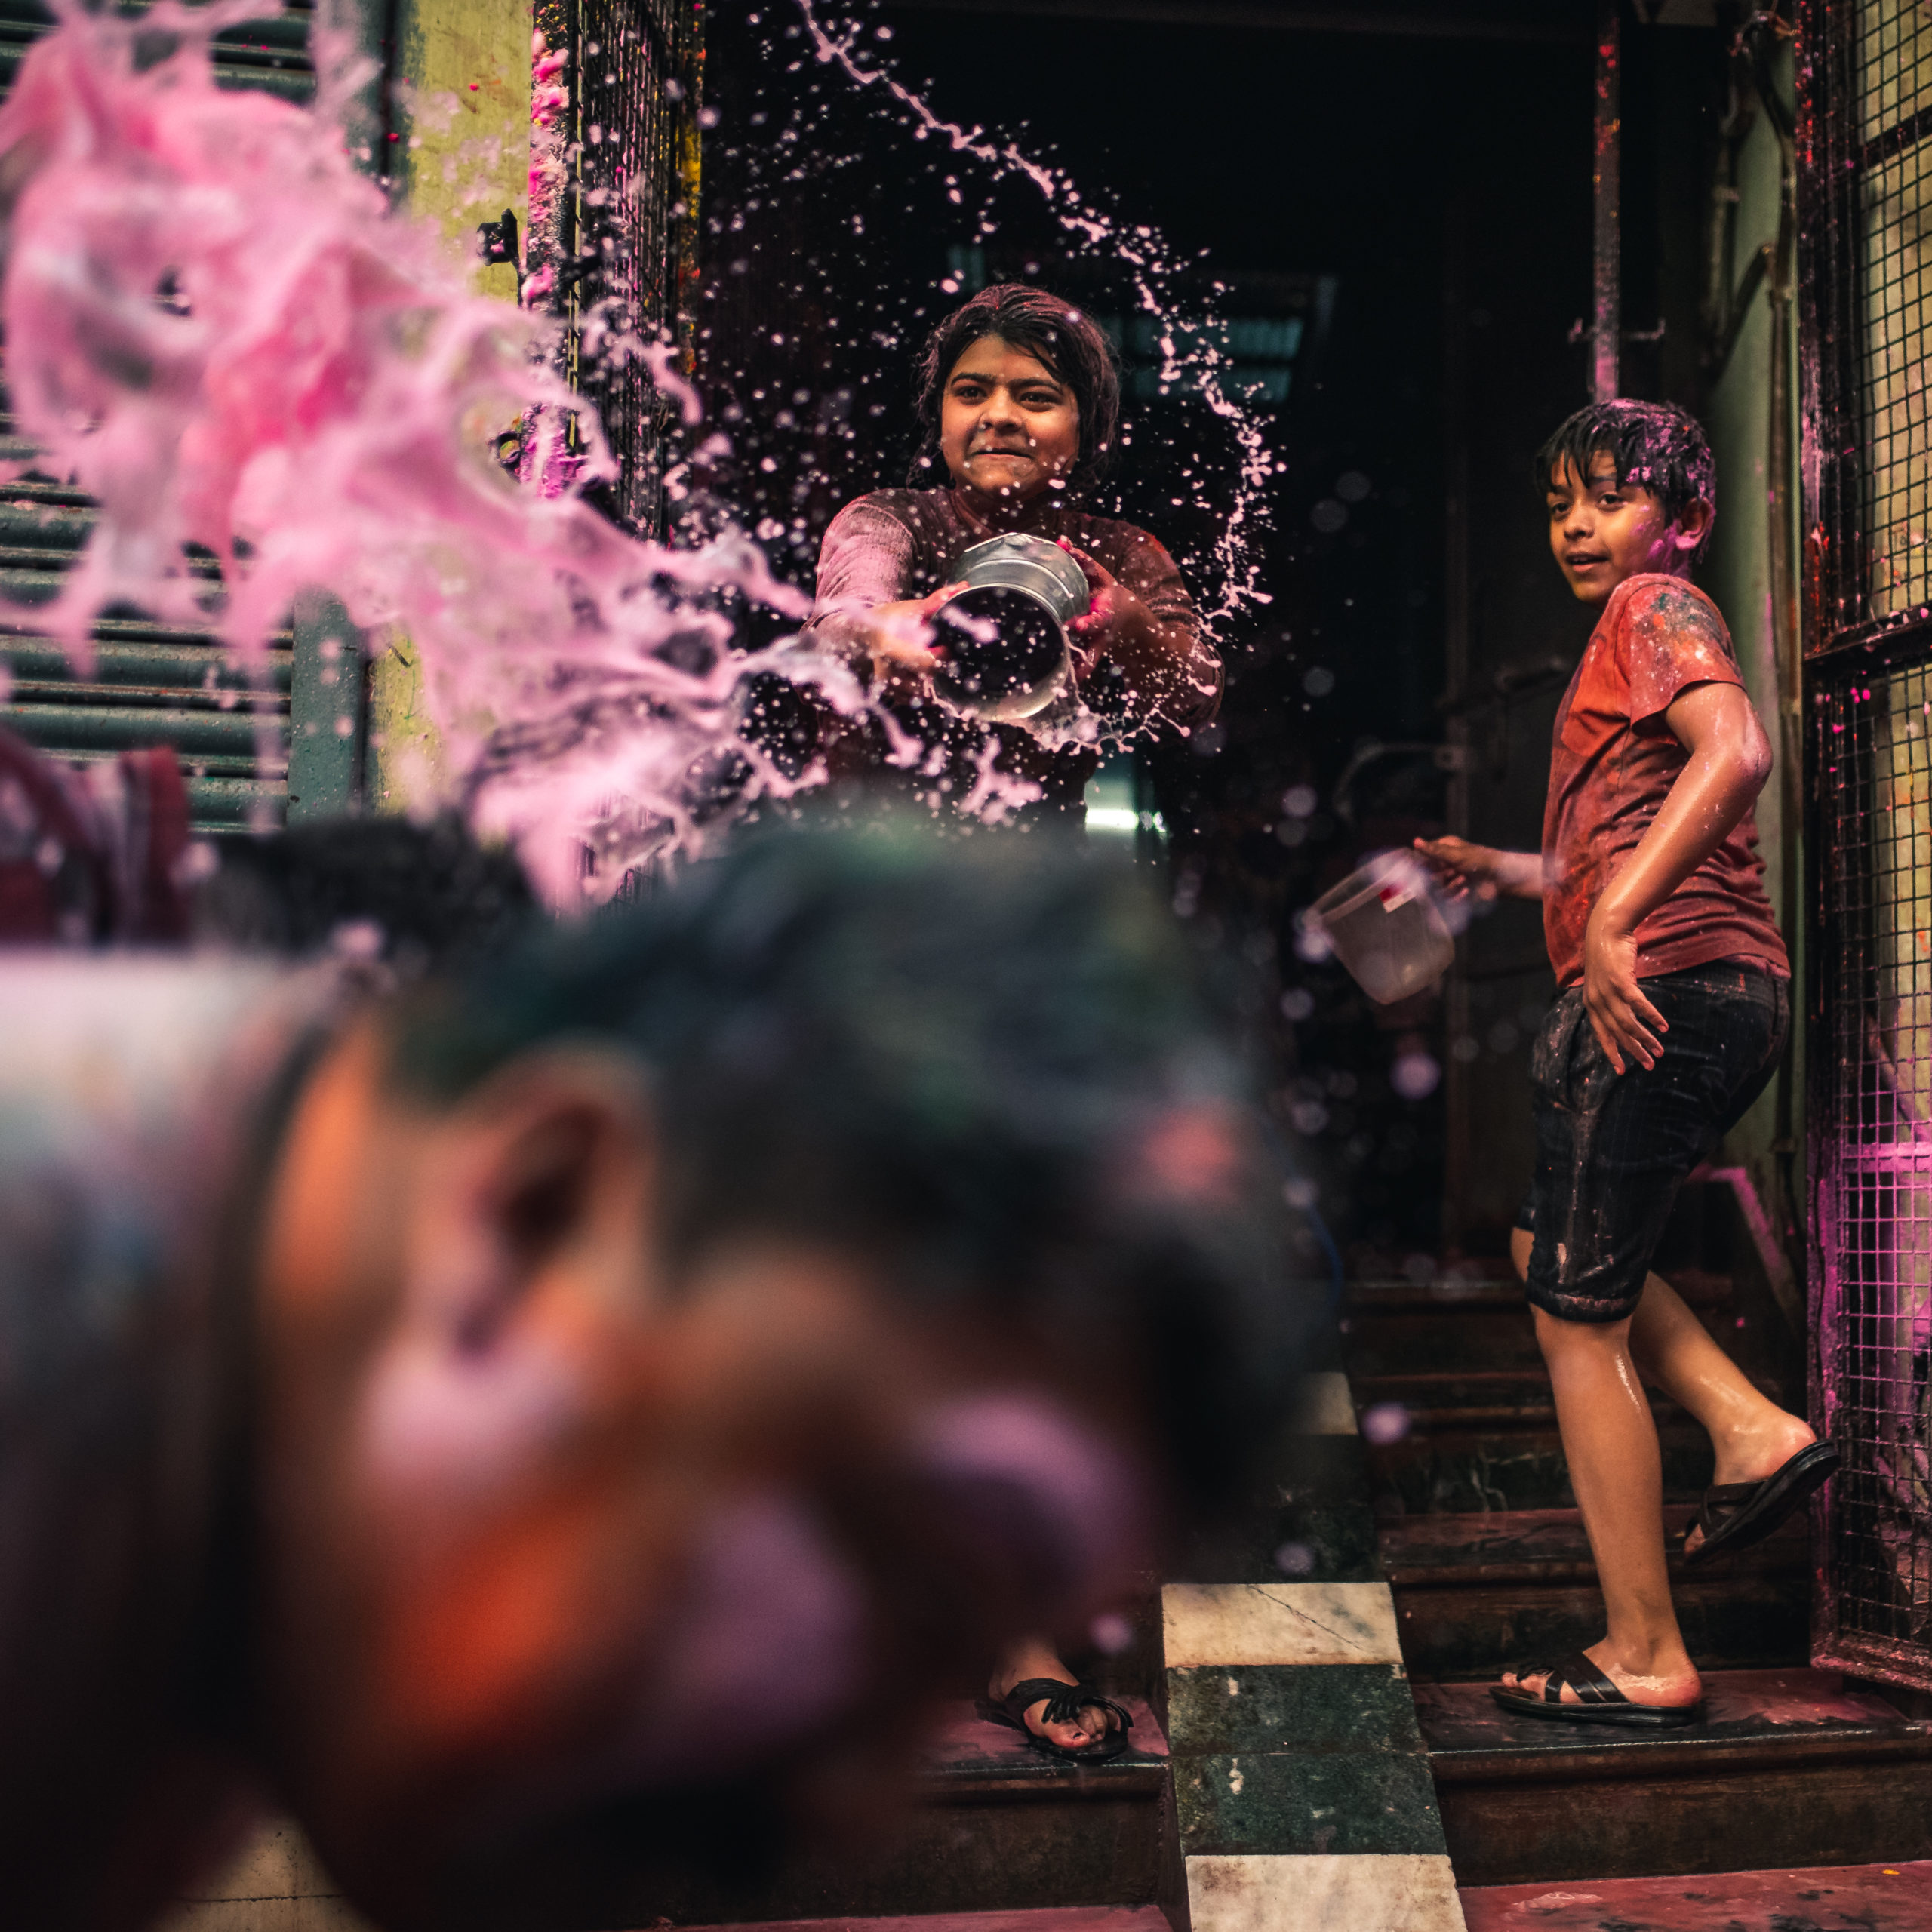 Street photography of a girl throwing a bucket of colorful water at a man in the streets of Vrindavan, India during the Holi Festival